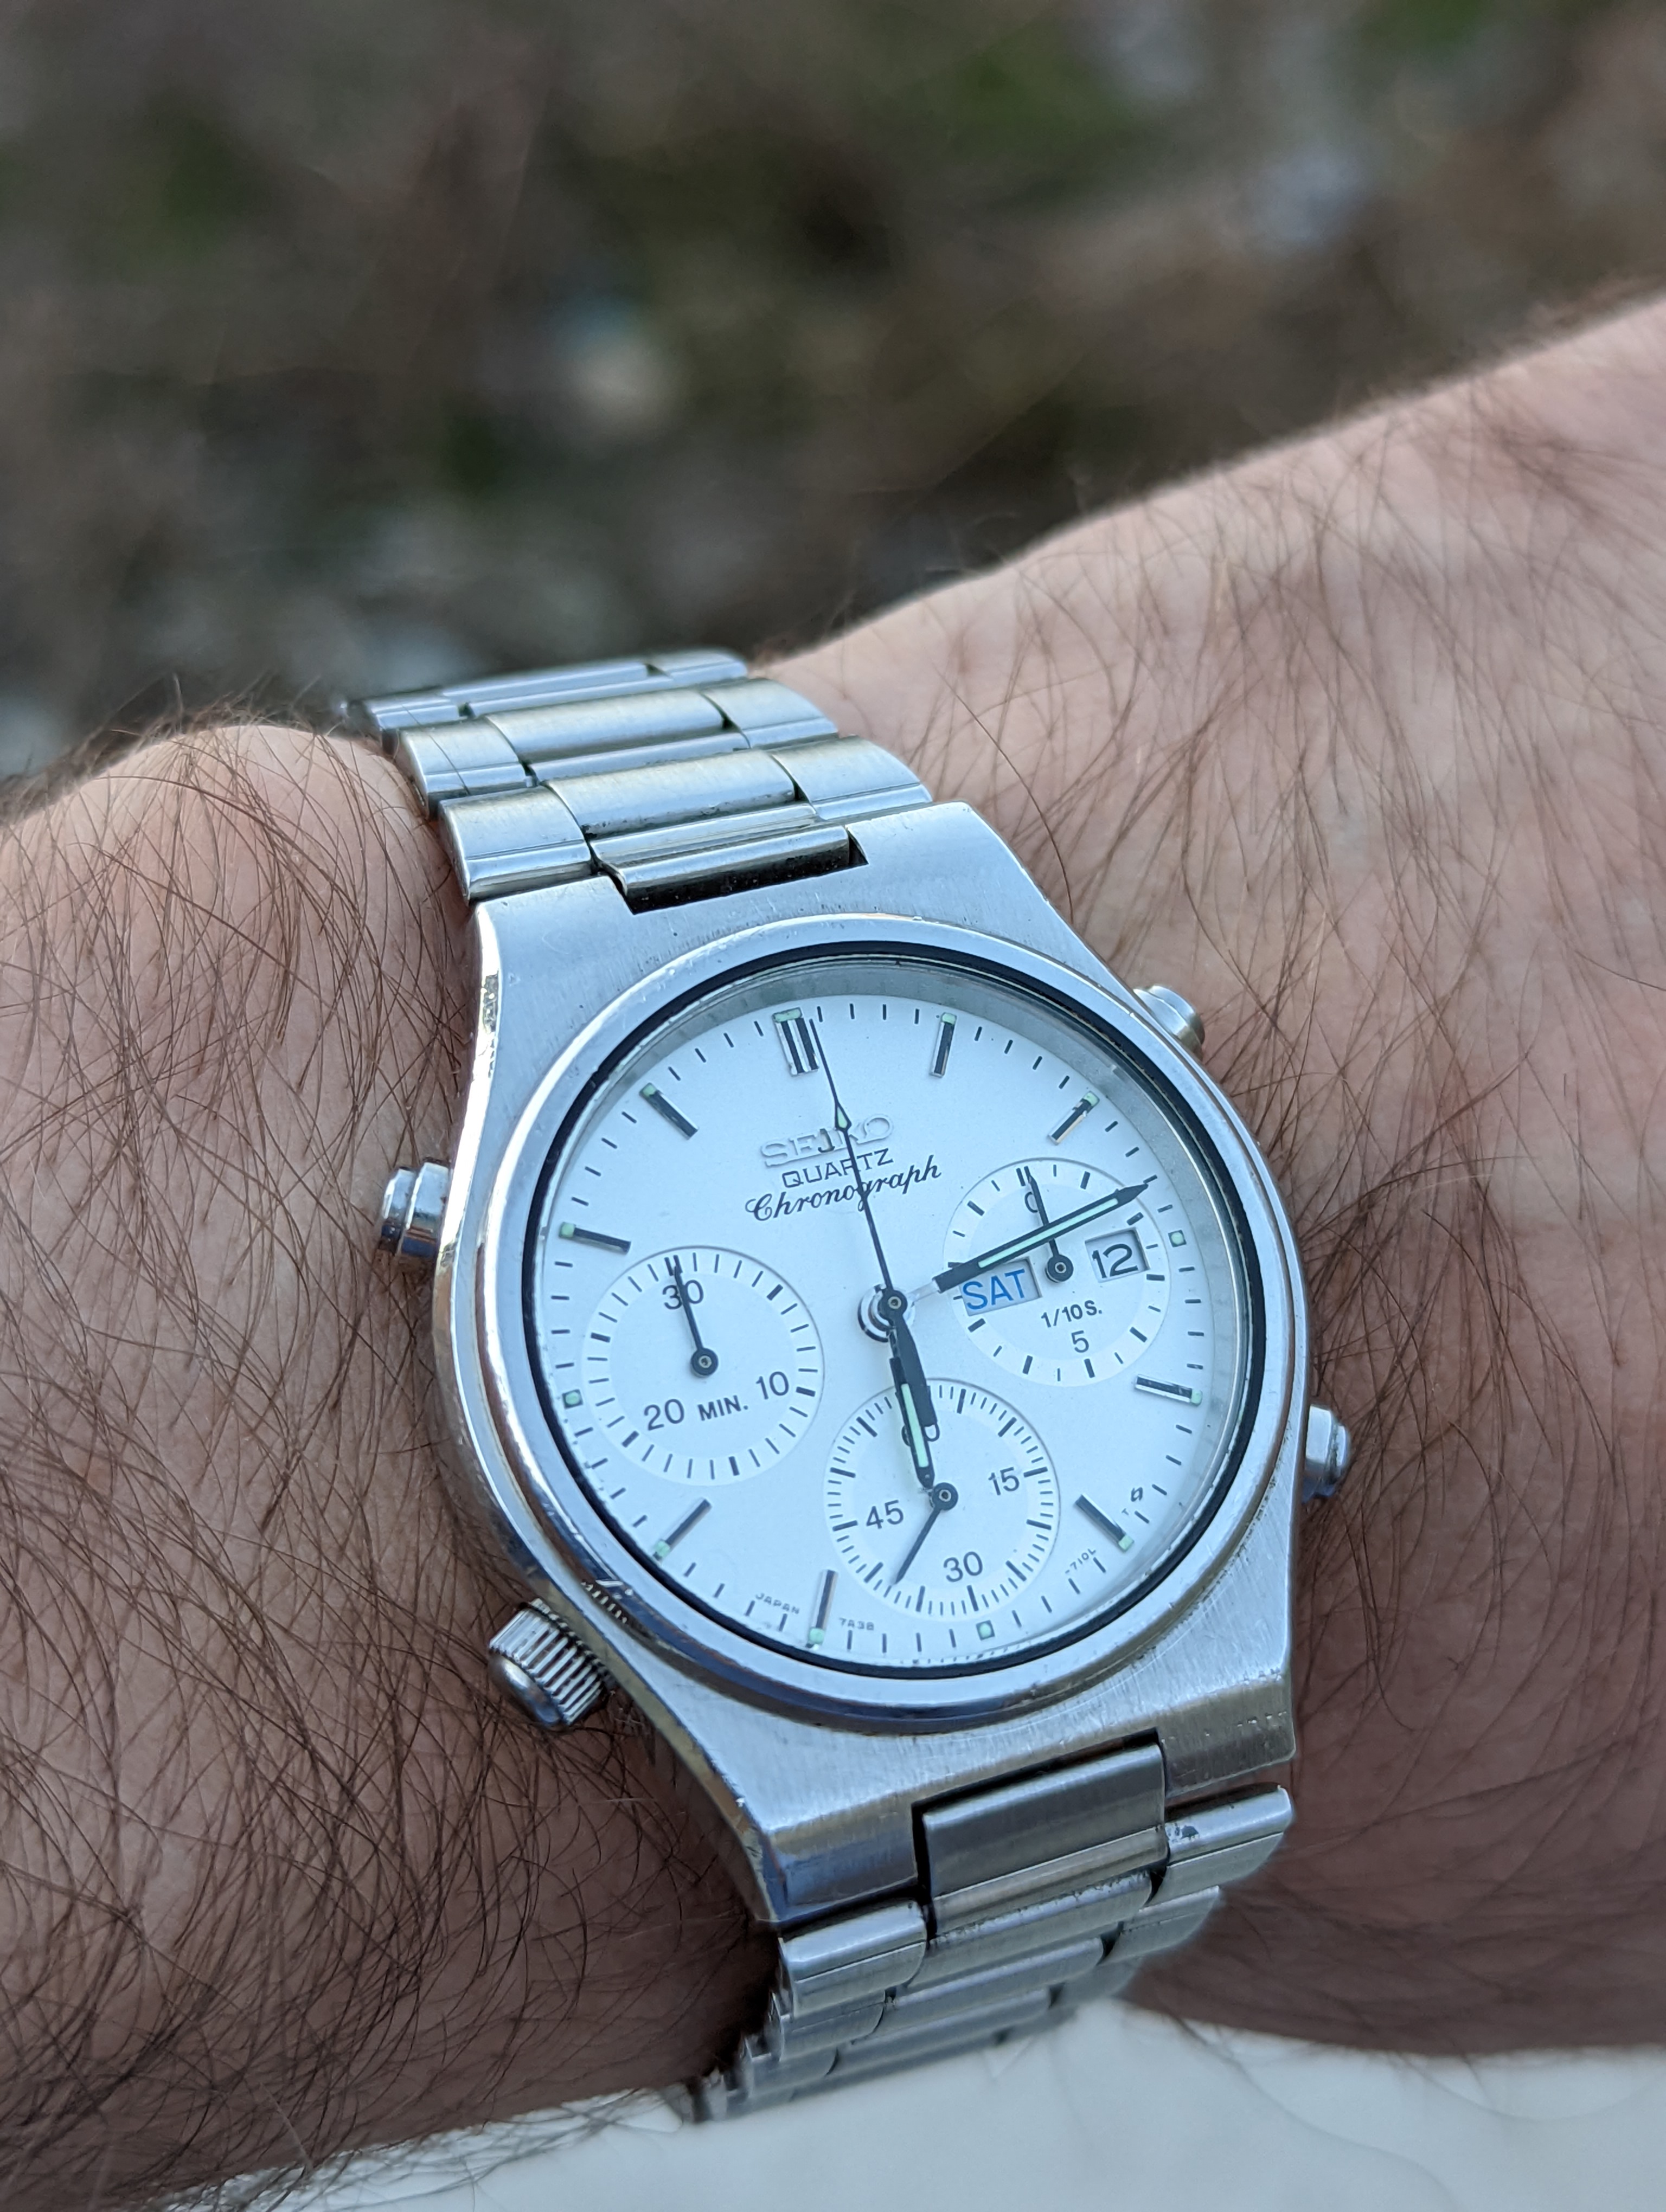 WTS] Gorgeous Seiko 7A38-7090 -- August 1984 -- 349$ Shipped | WatchCharts